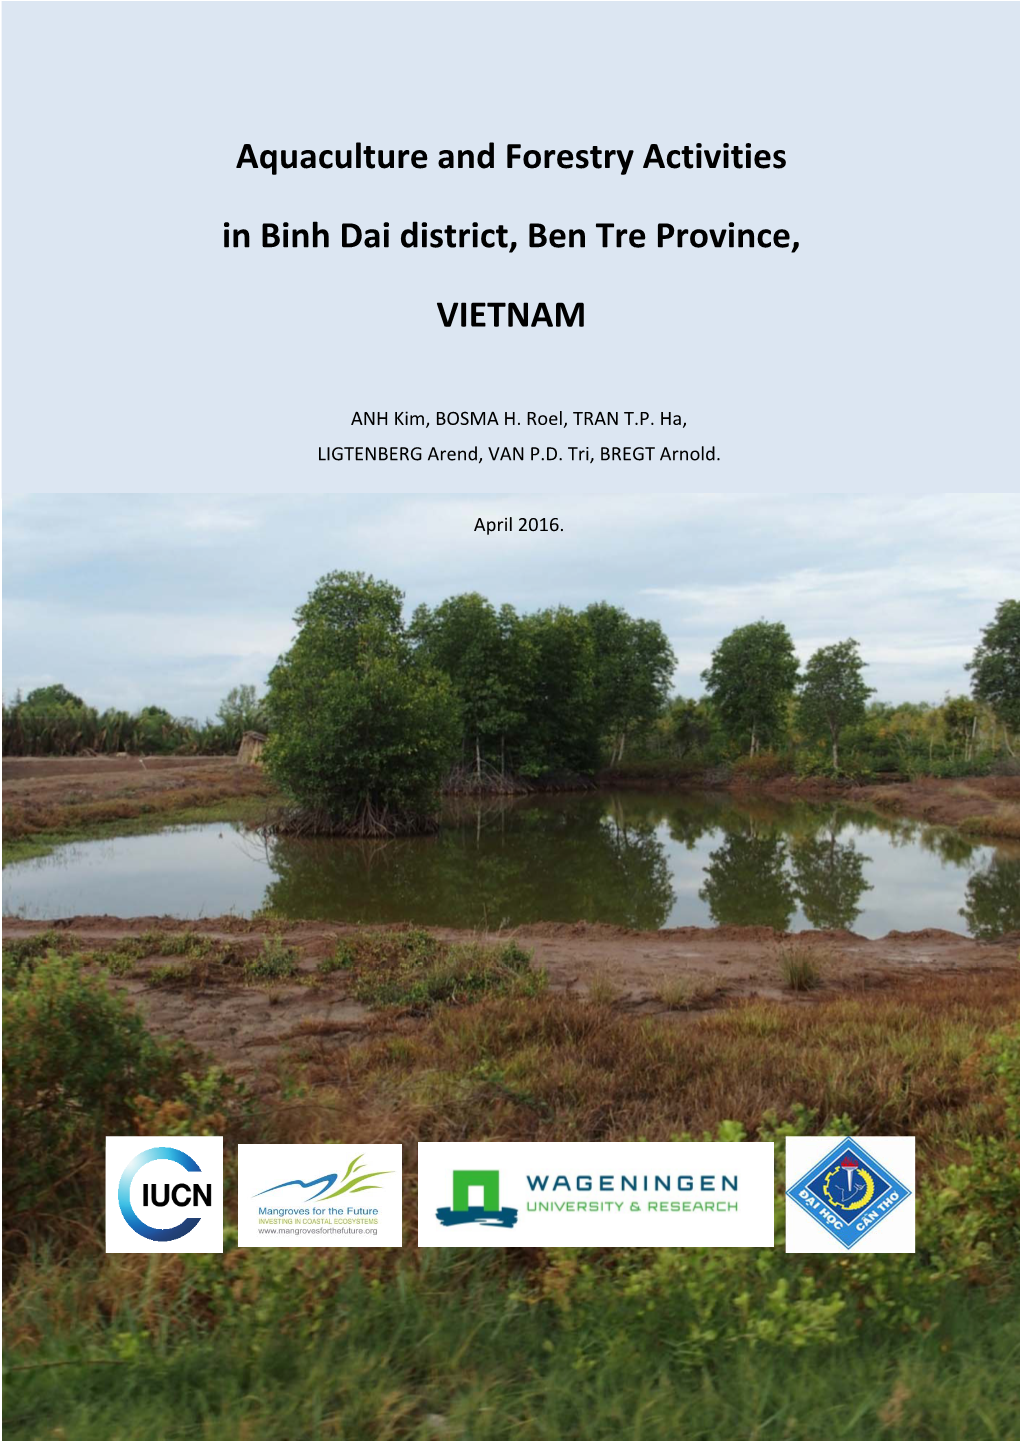 Aquaculture and Forestry Activities in Binh Dai District, Ben Tre Province, Vietnam